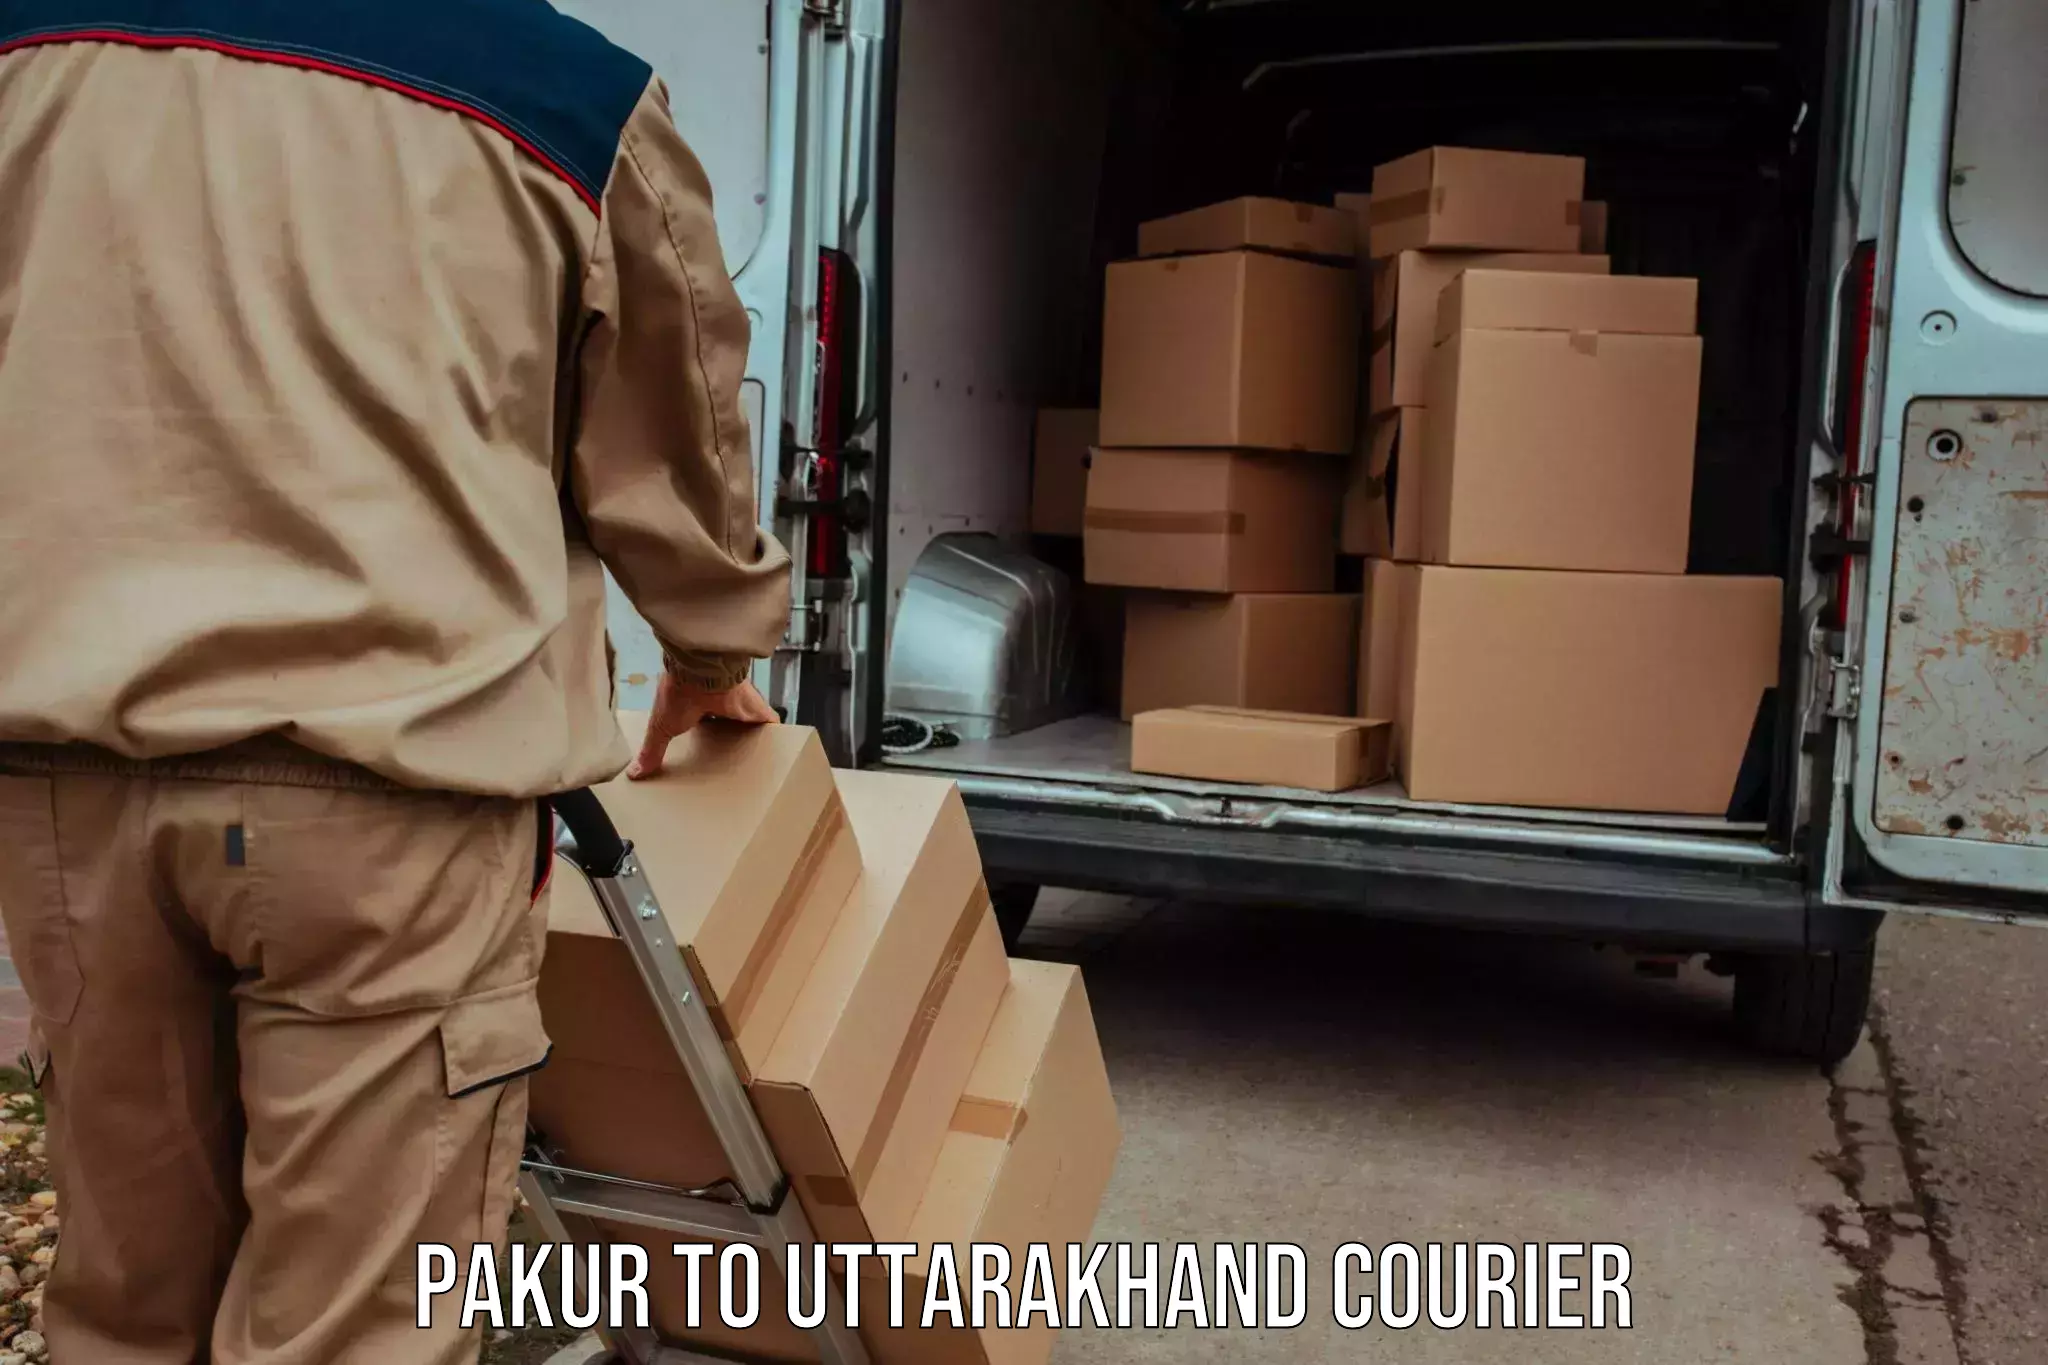 Multi-national courier services Pakur to Almora